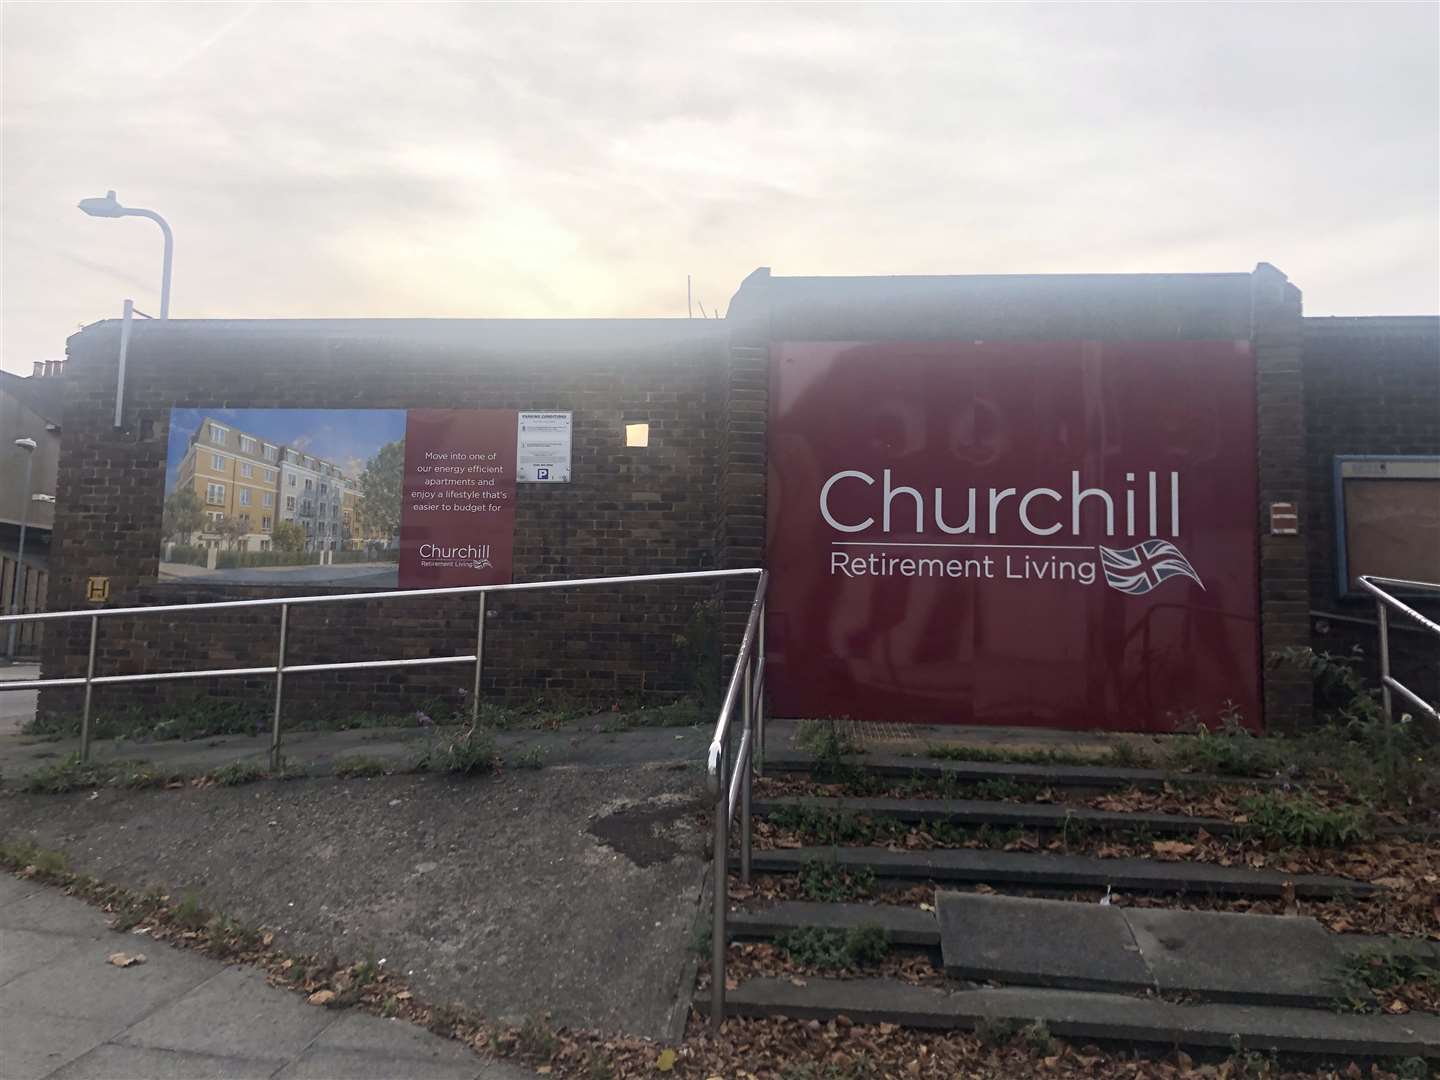 The former police station in Windmill Street, Gravesend is set to become retirement flats by Churchill Retirement Living. New placards have gone up ahead of next week's planning meeting